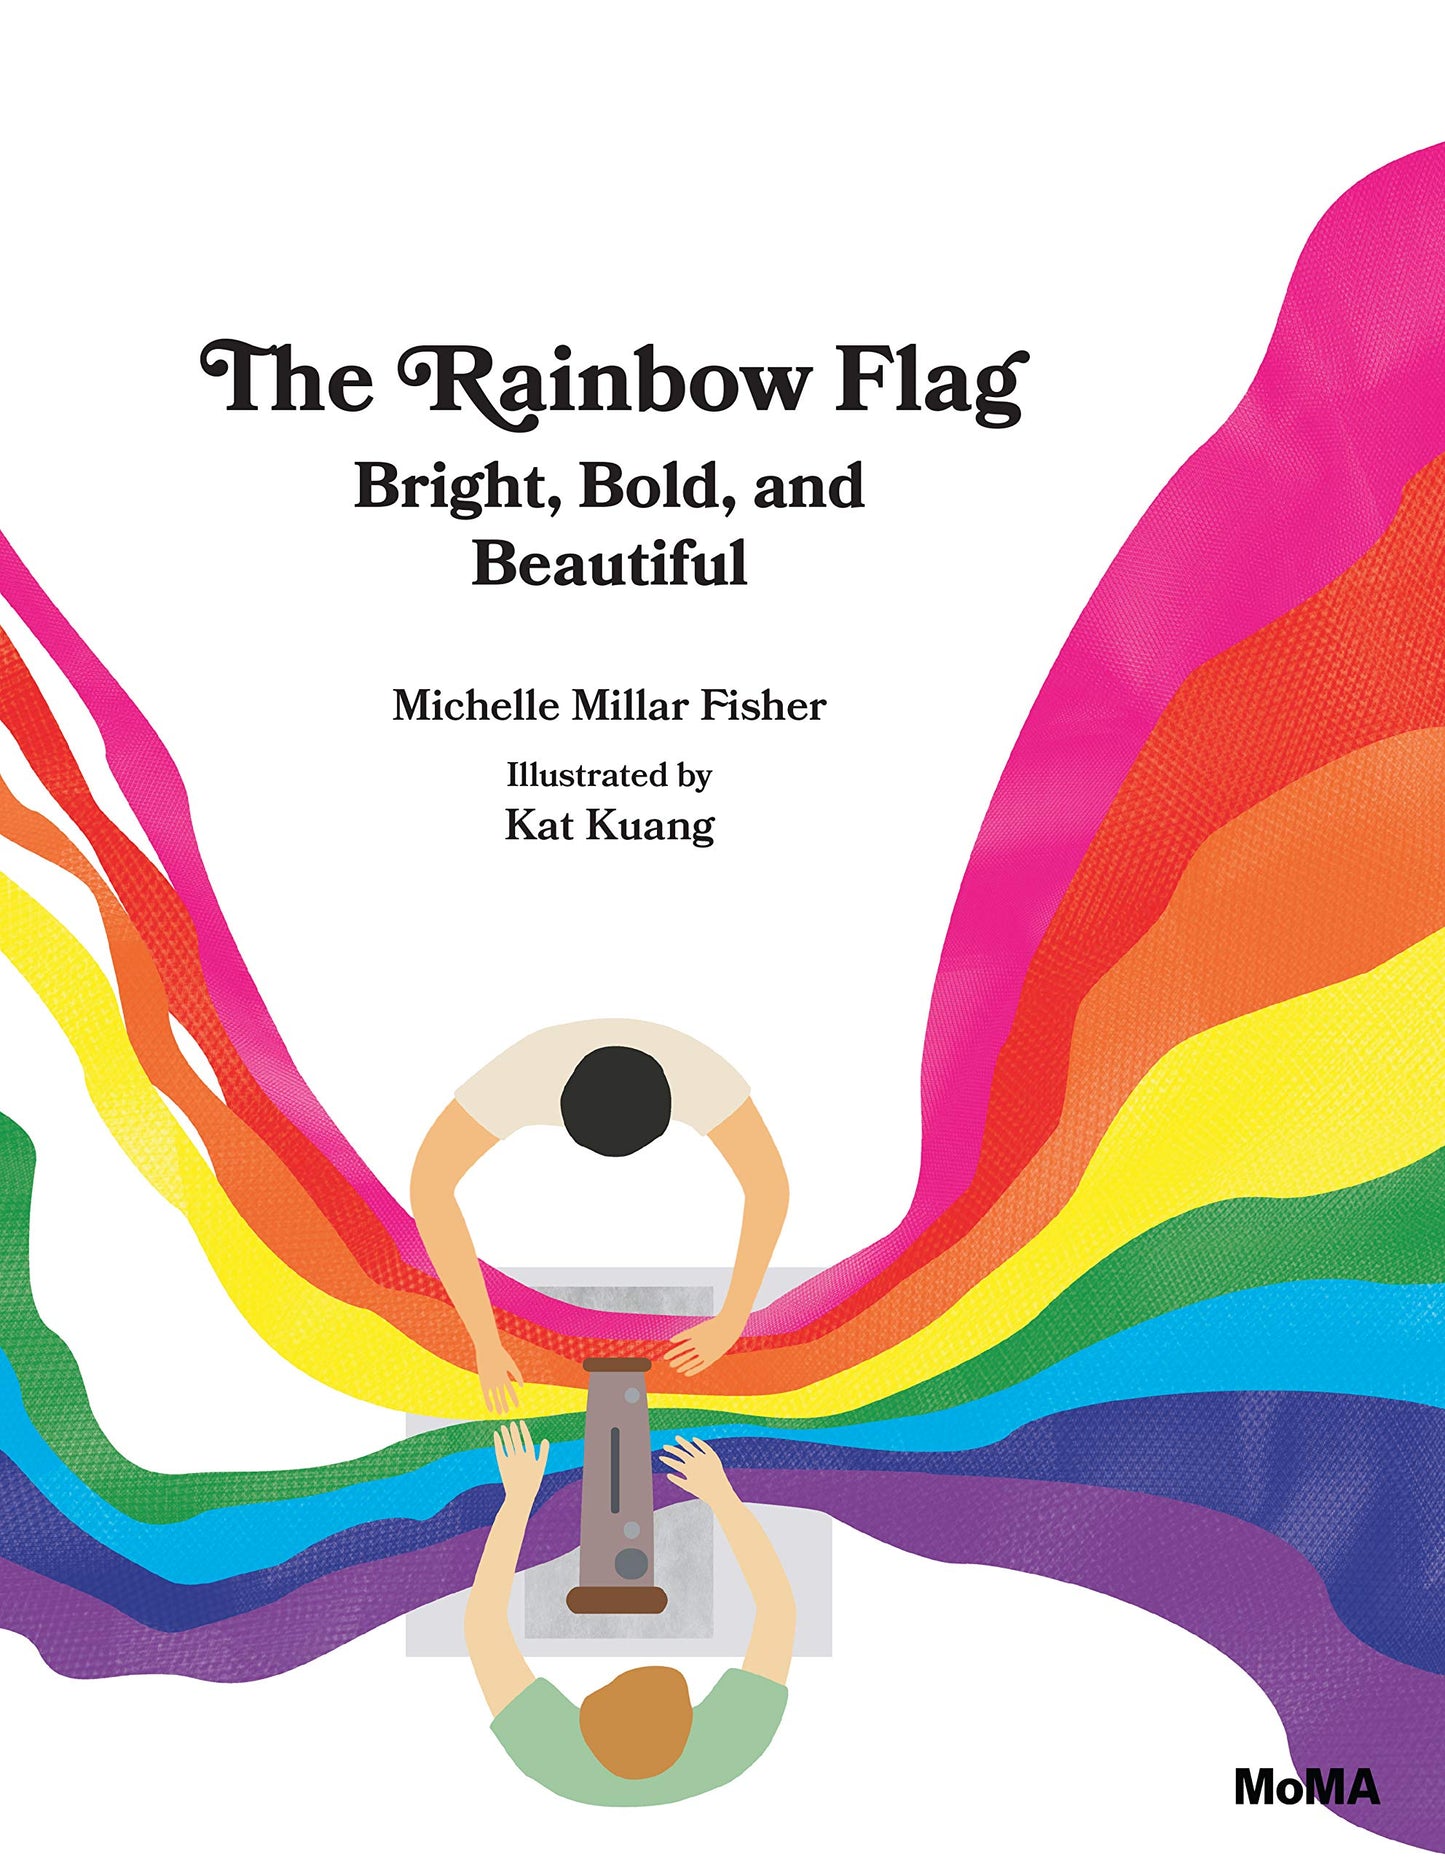 MoMA The Rainbow Flag by Michelle Millar Fisher & Kat Kyang